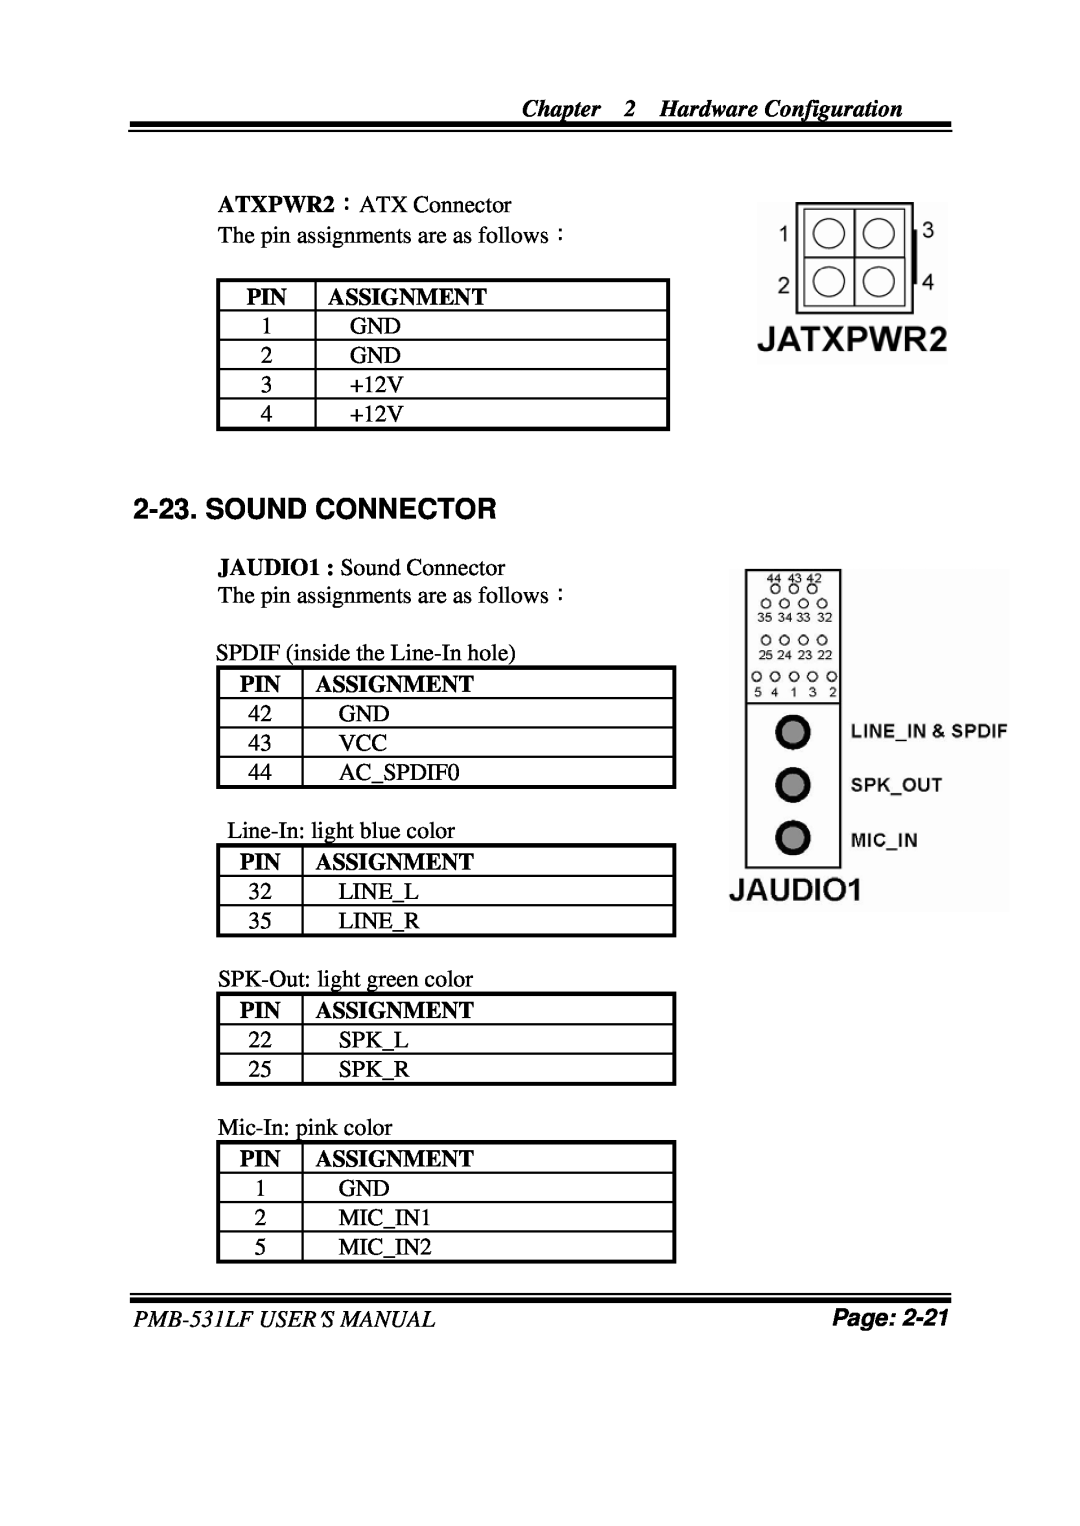 Intel user manual Sound Connector, Hardware Configuration, Pin Assignment, PMB-531LFUSER′S MANUAL, Page 